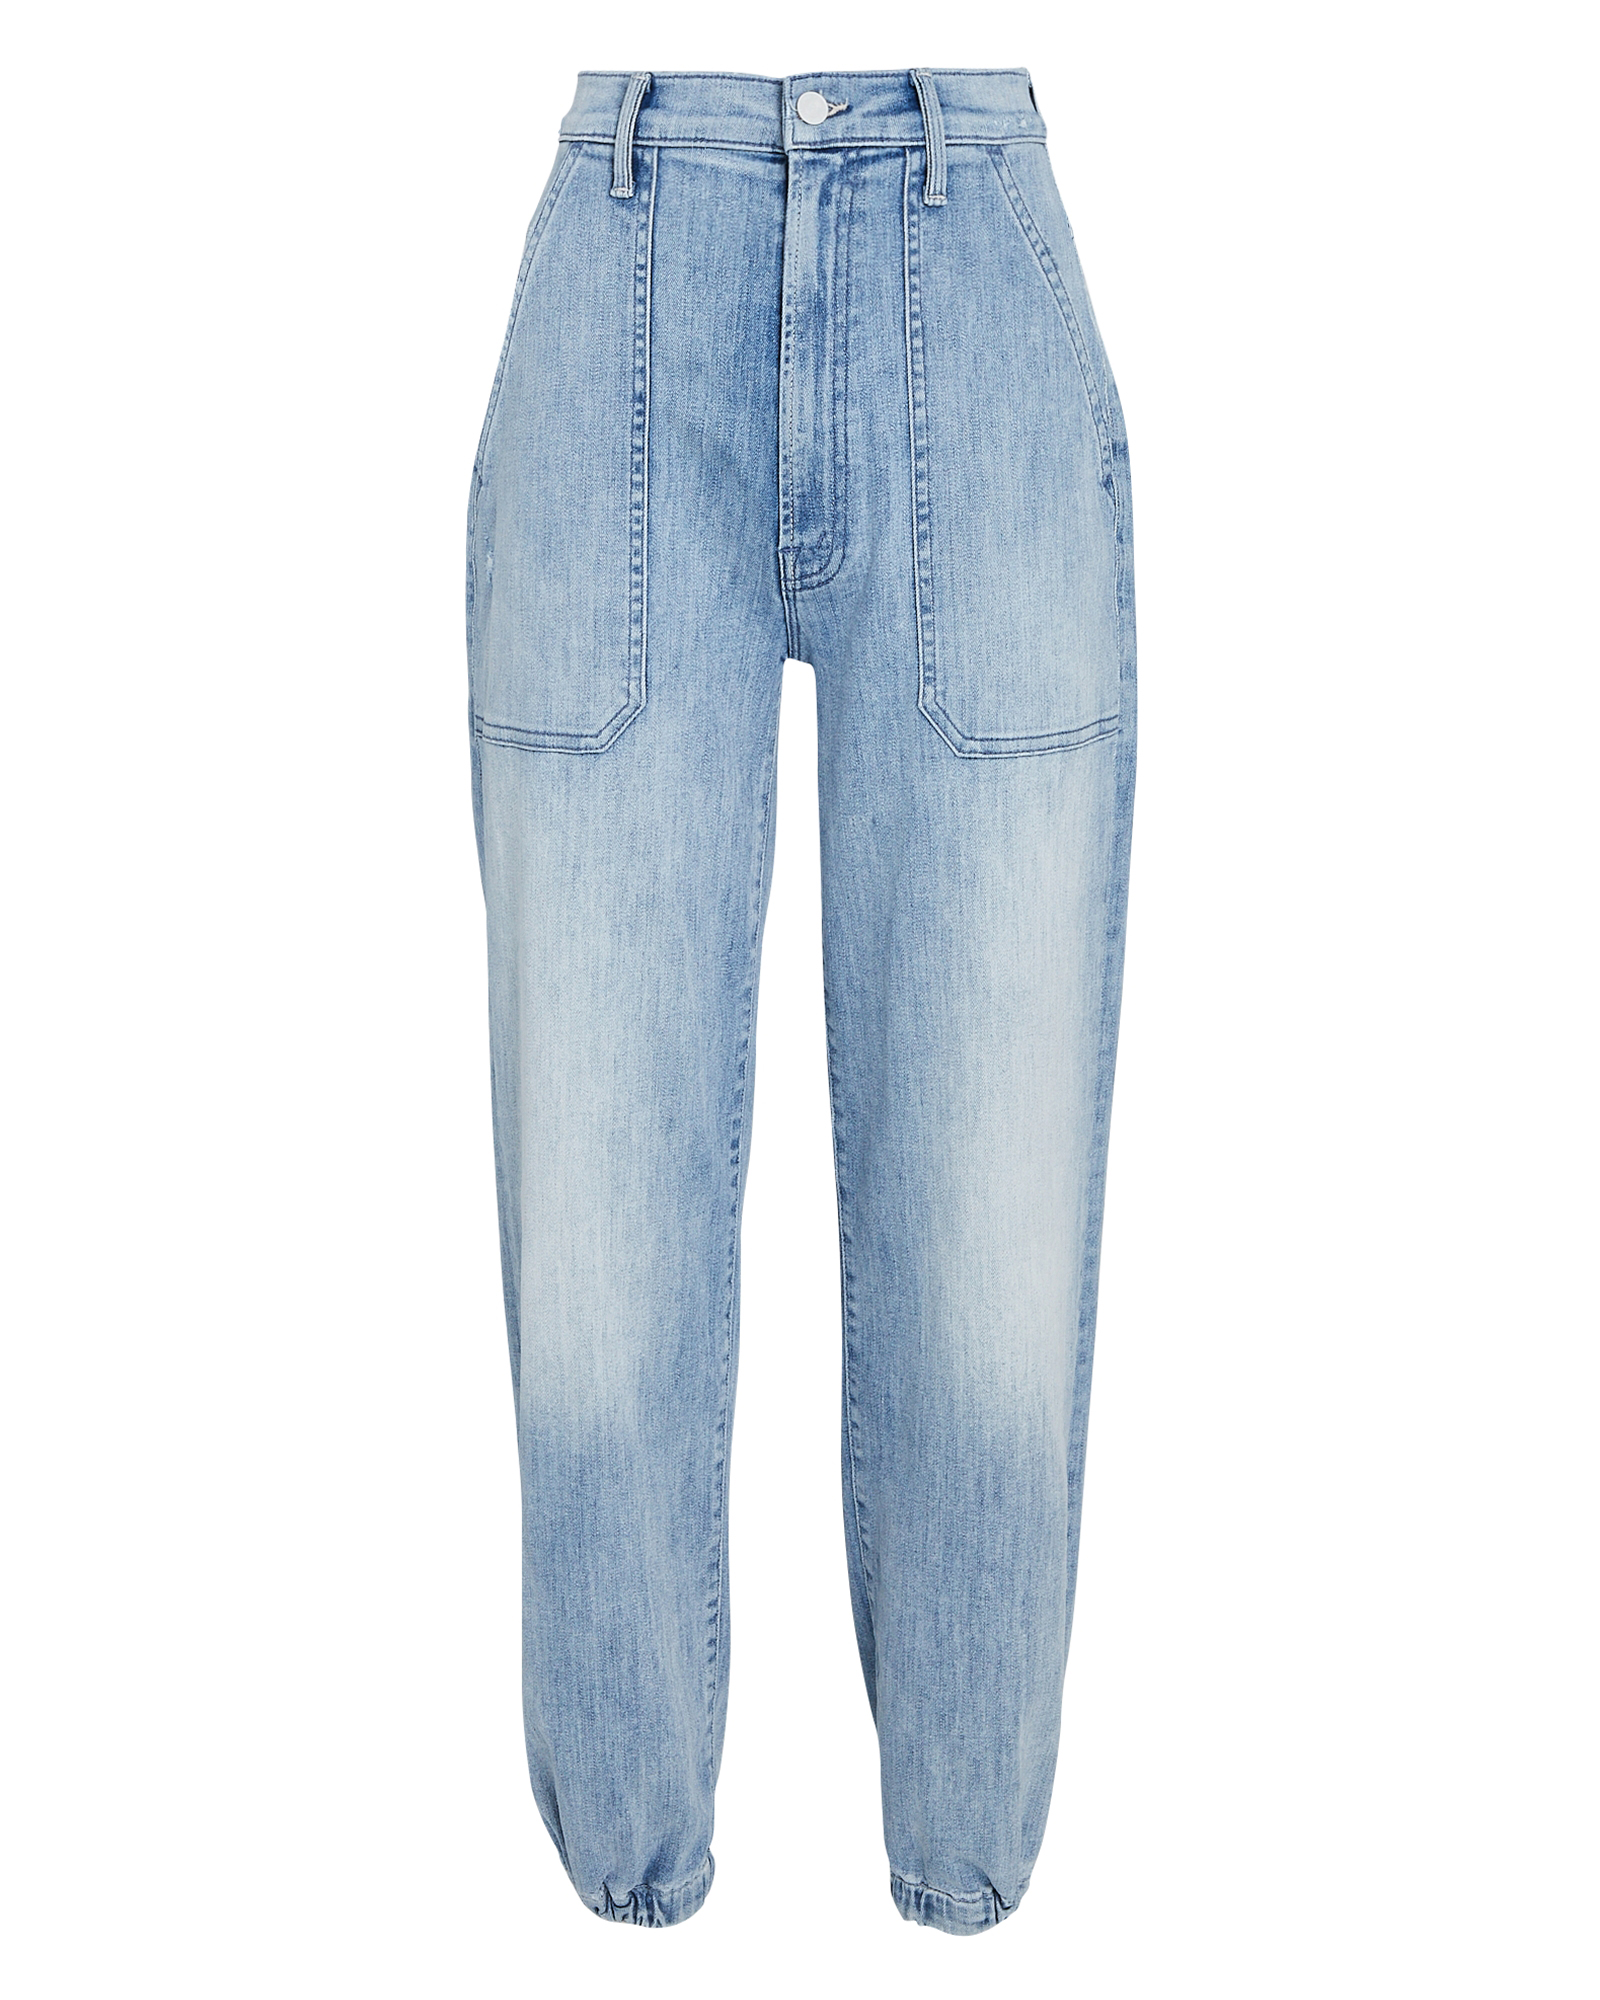 MOTHER The Wrapper High-Rise Ankle Jeans | INTERMIX®